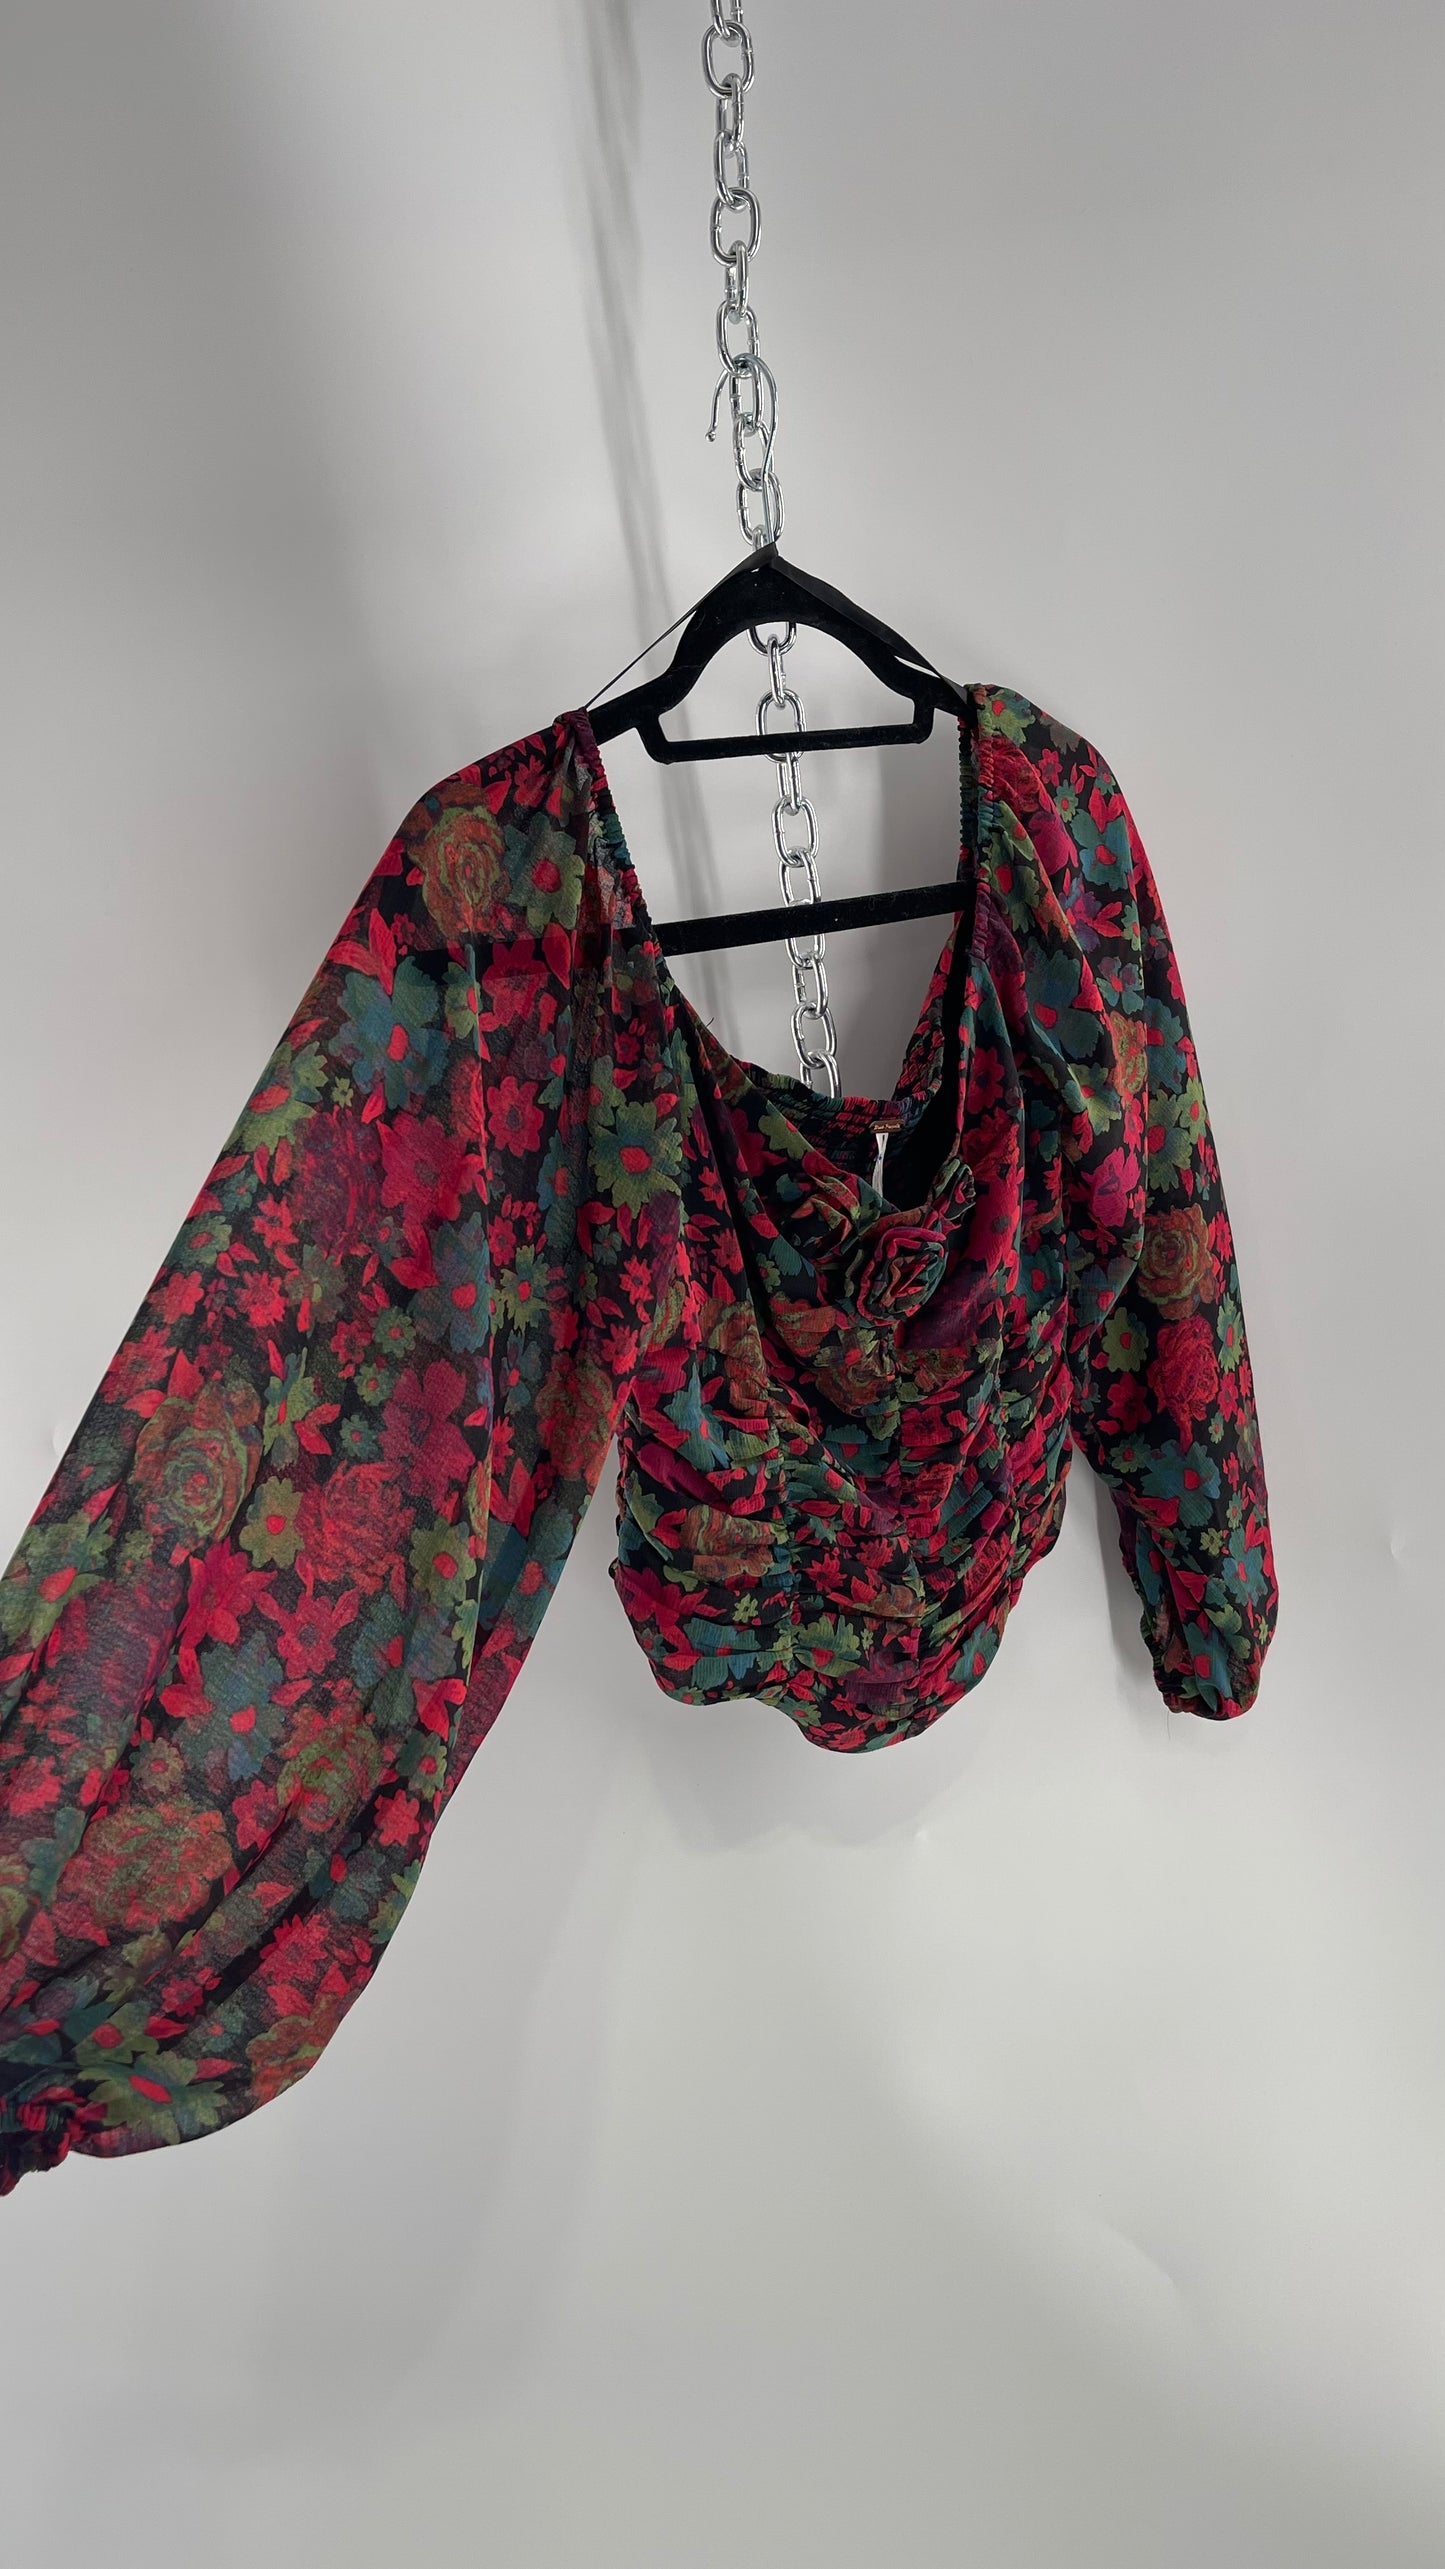 Free People Cropped Floral Blouse with Ruched Body, Balloon Sleeves and Appliqué Rosette Bustline with Tags Attached (Small)